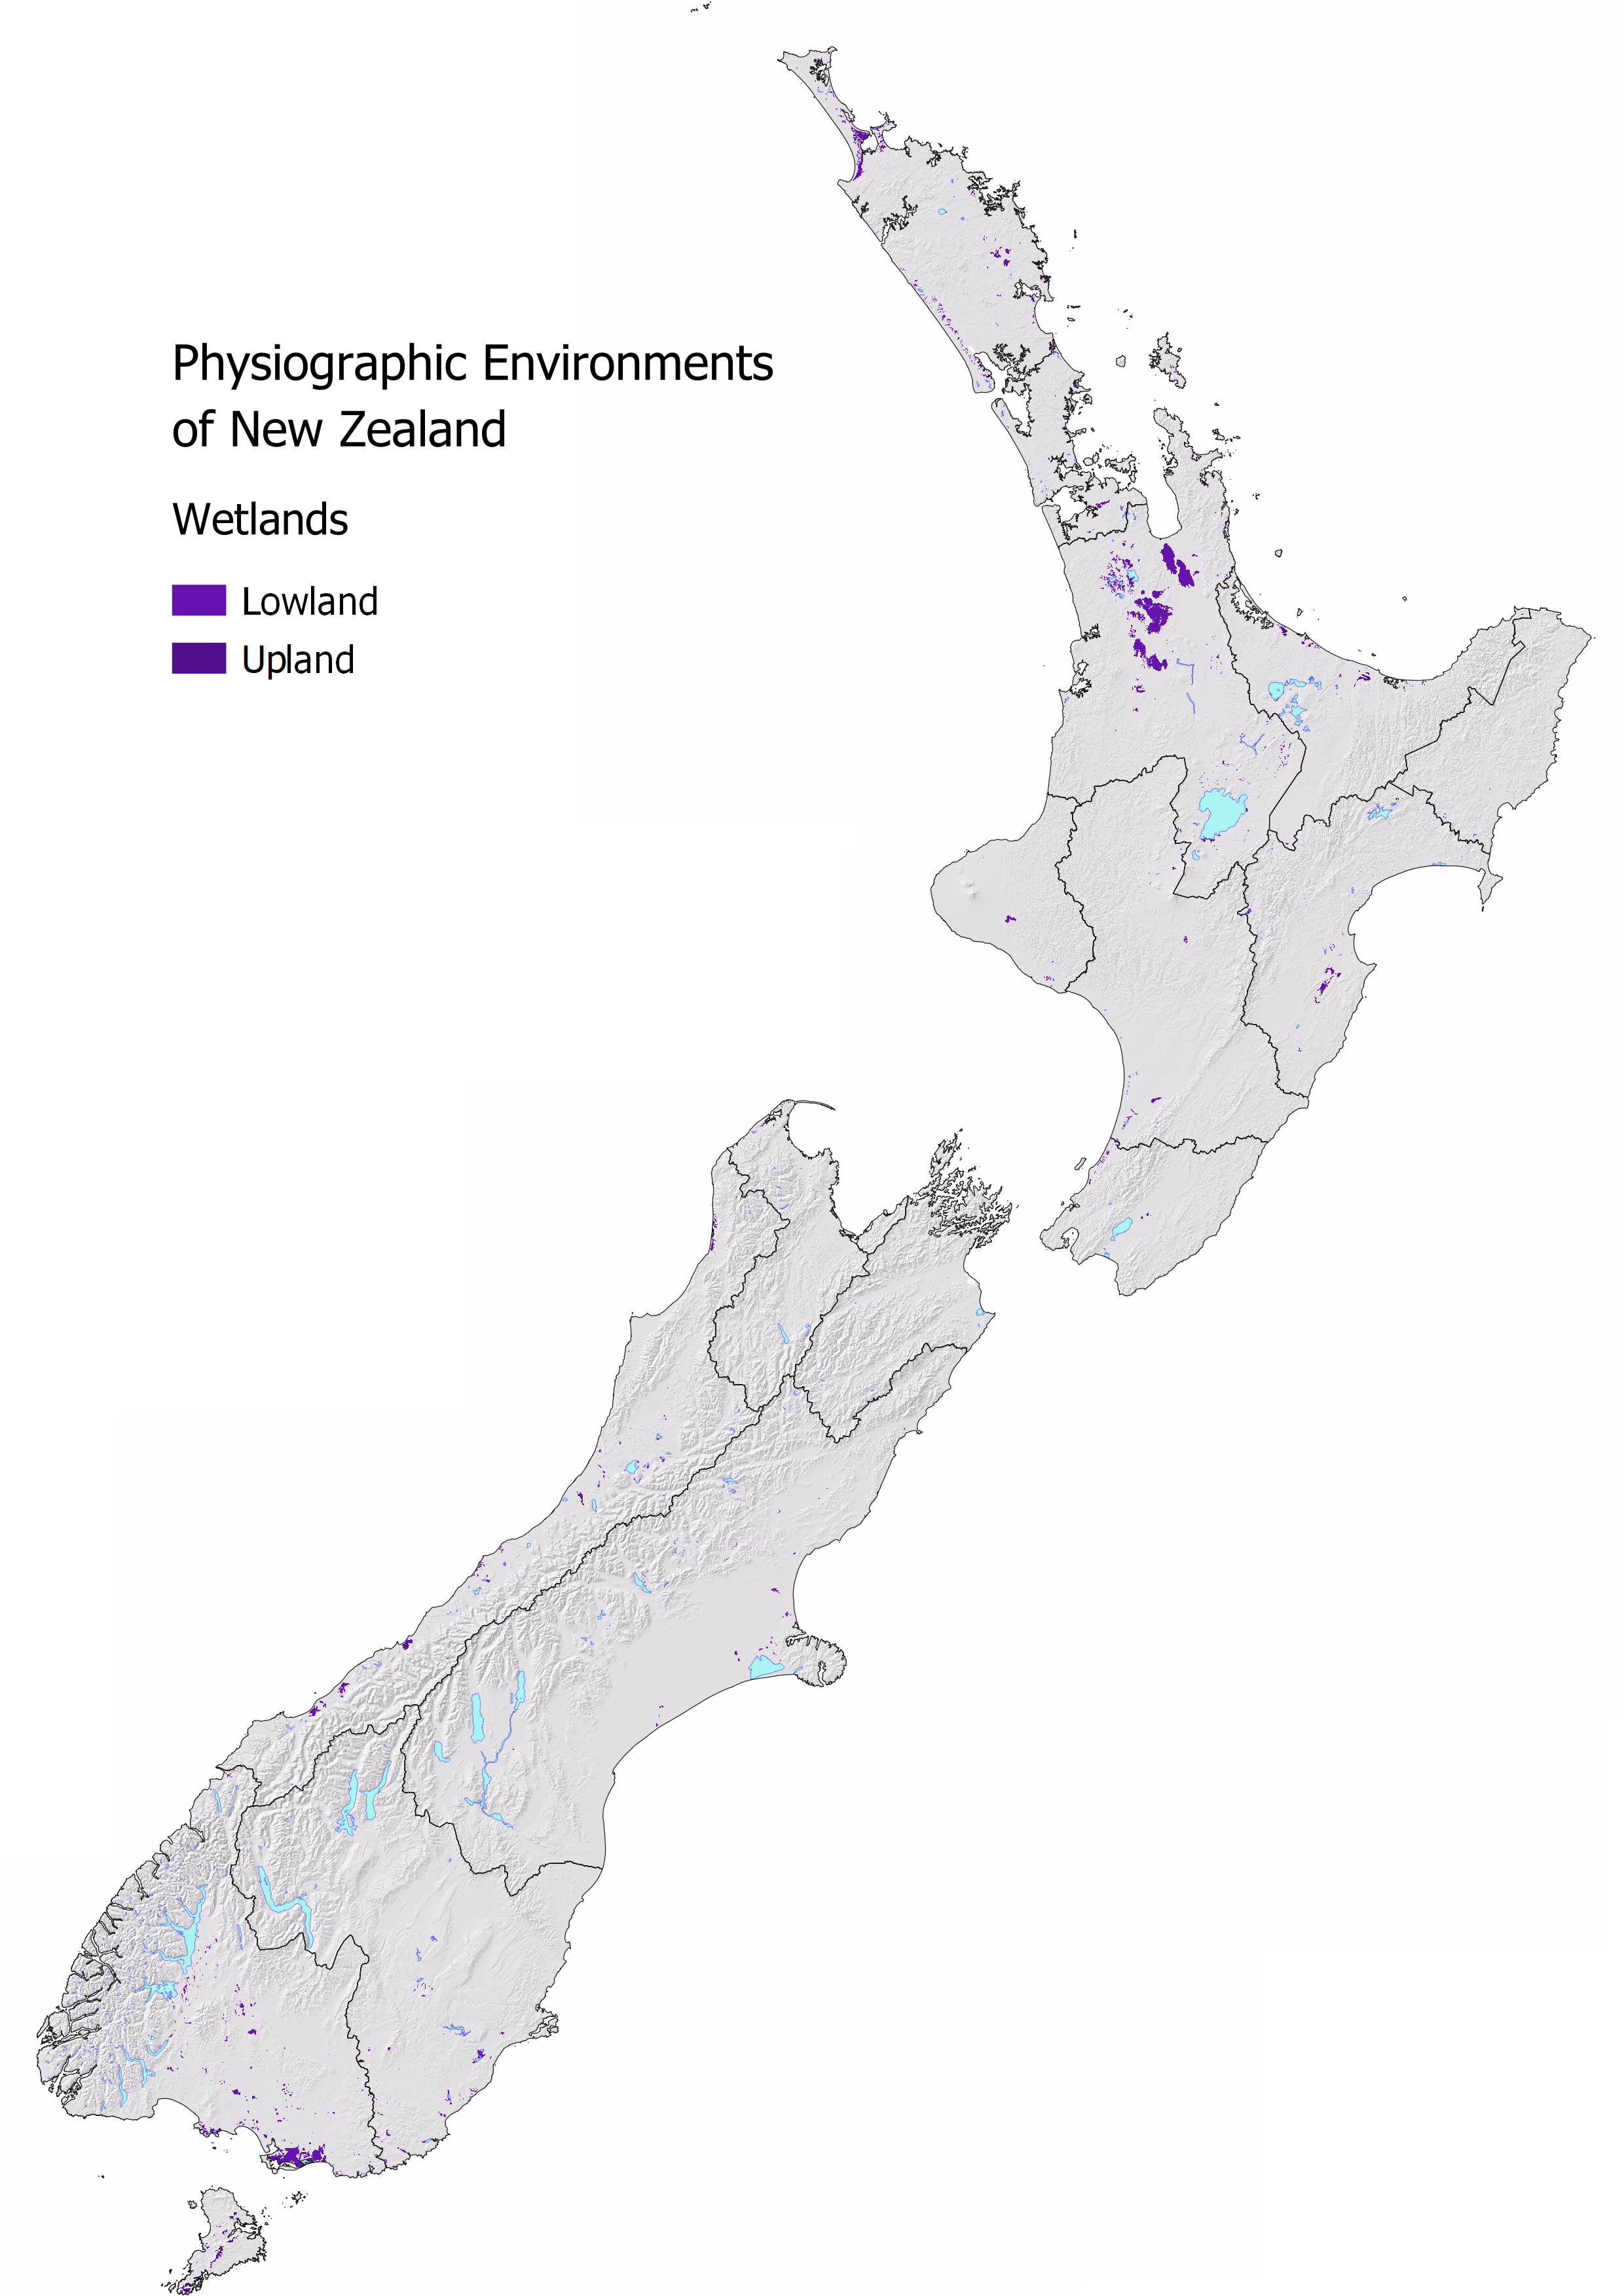 slope map of new zealand with the parts classified as 'Wetlands' showing.